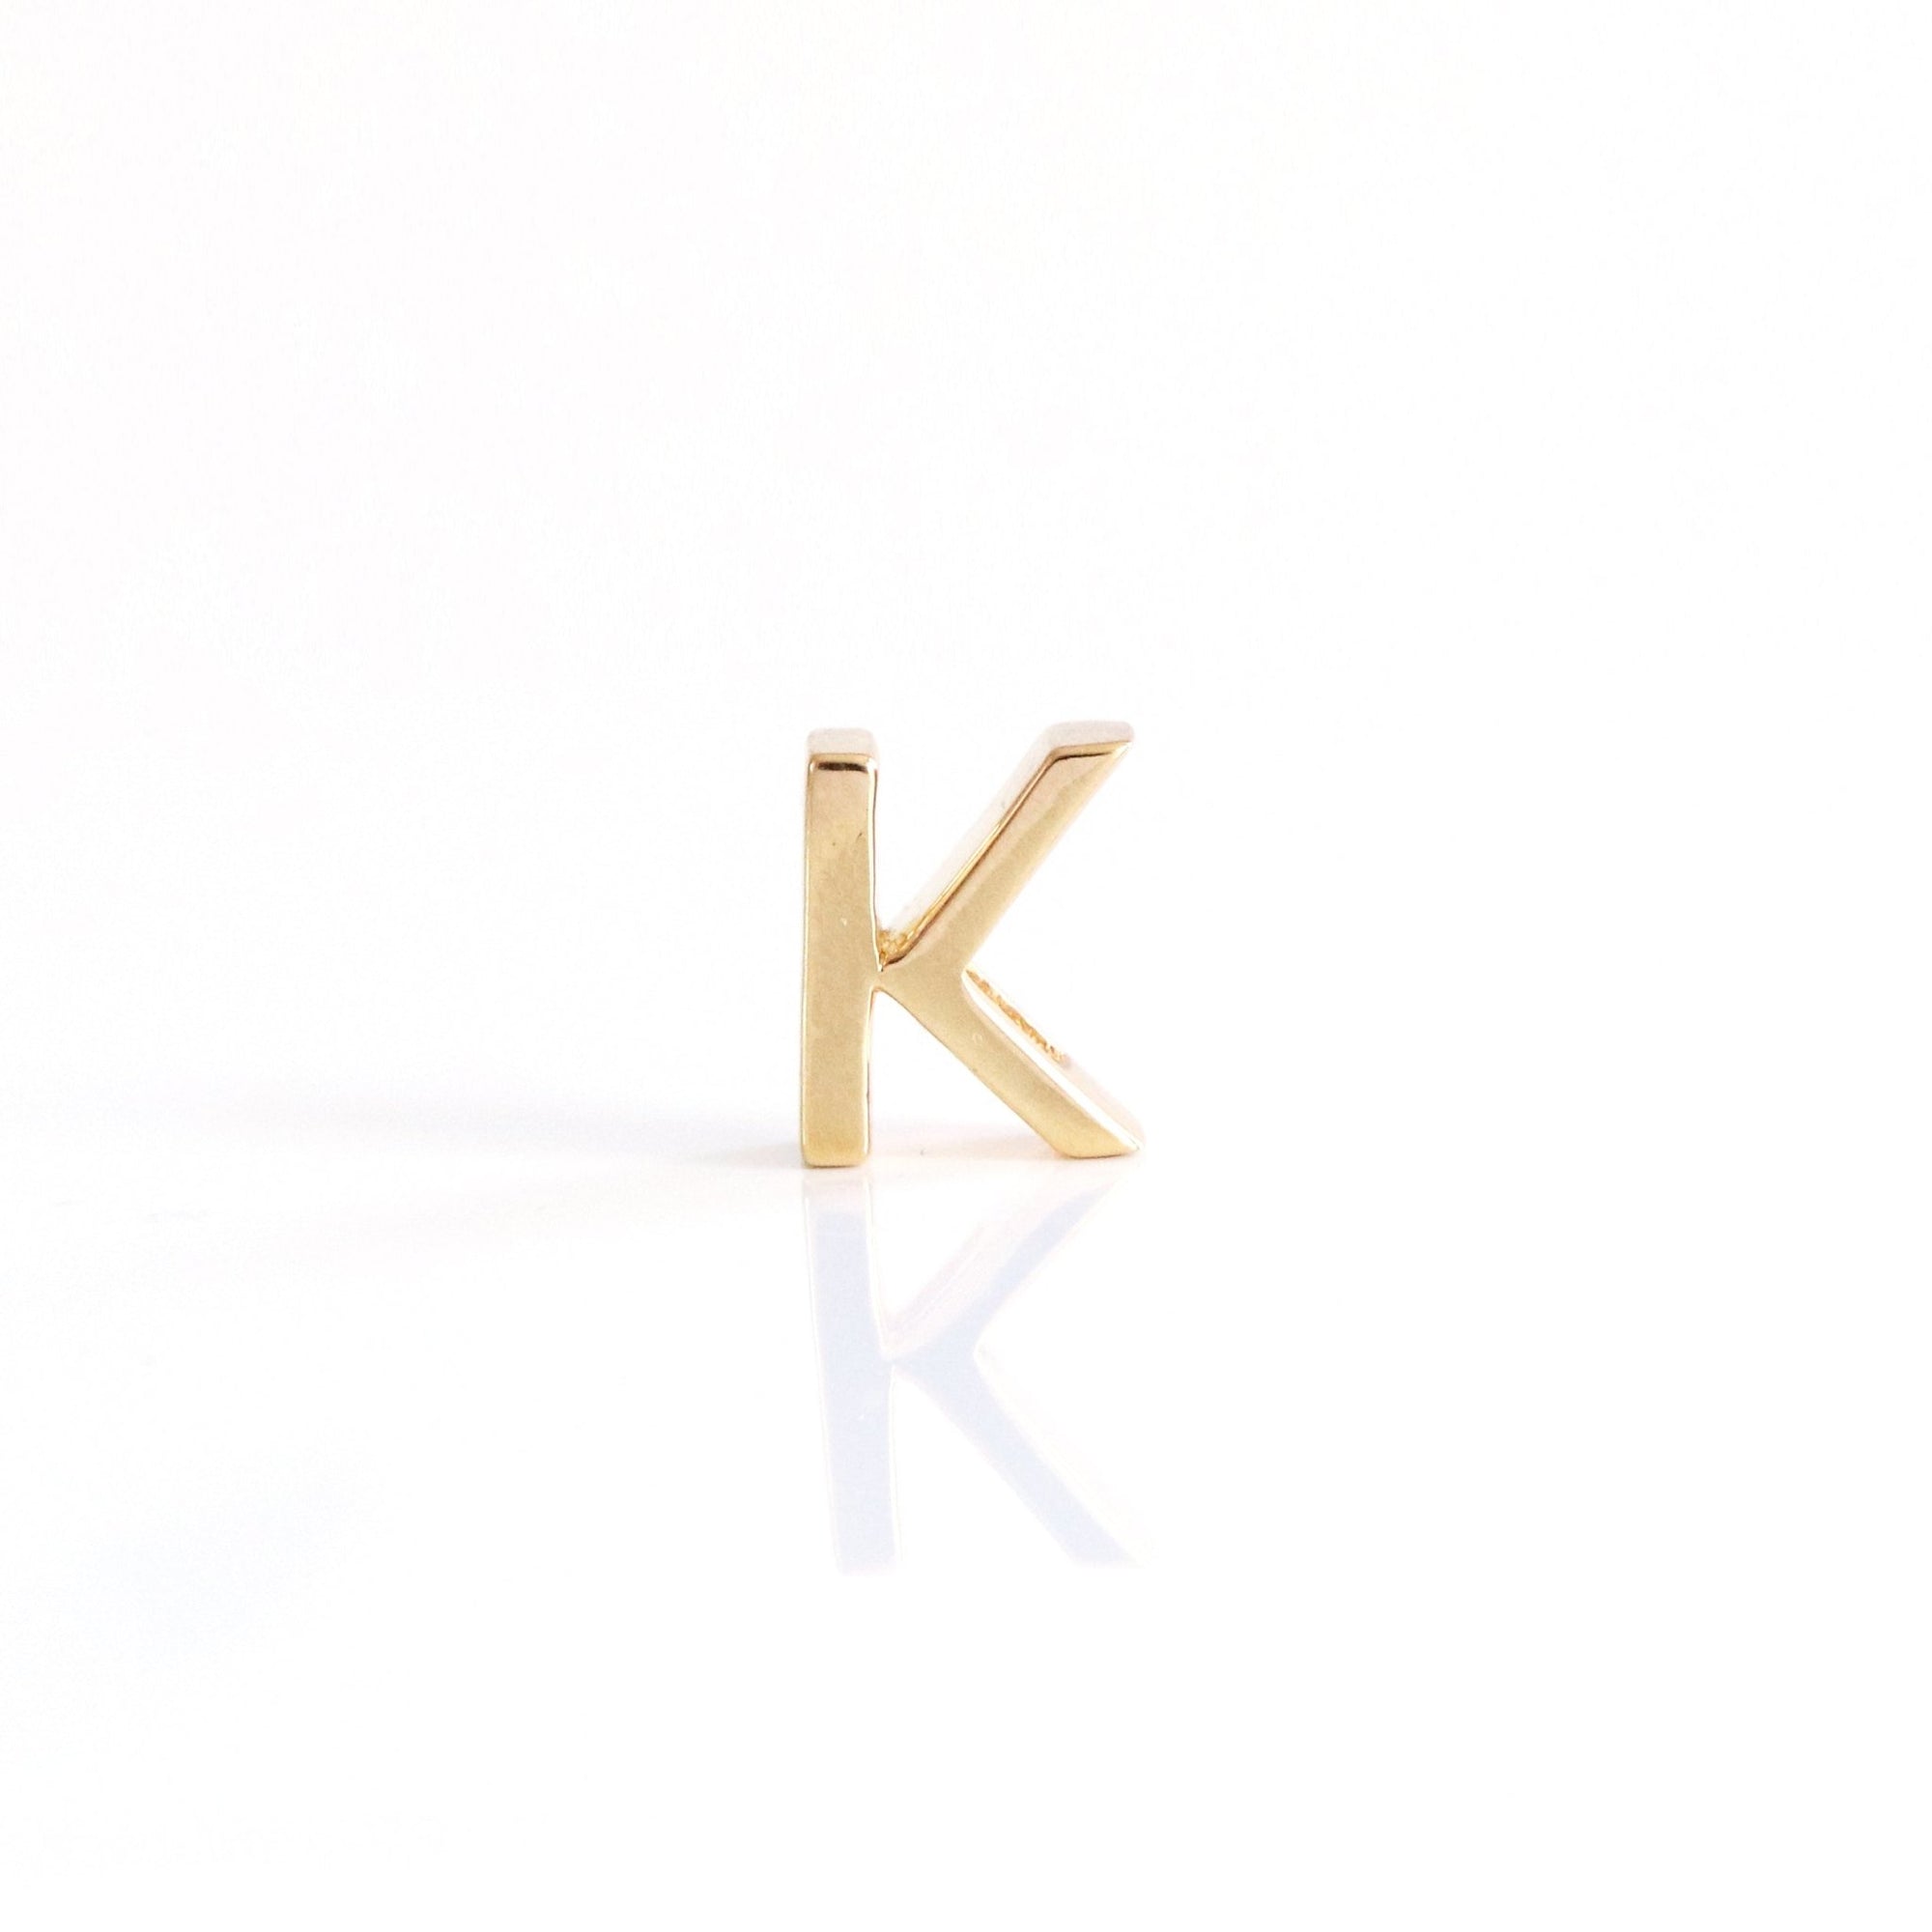 CHARMED INITIAL - K - GOLD OR SILVER - SO PRETTY CARA COTTER